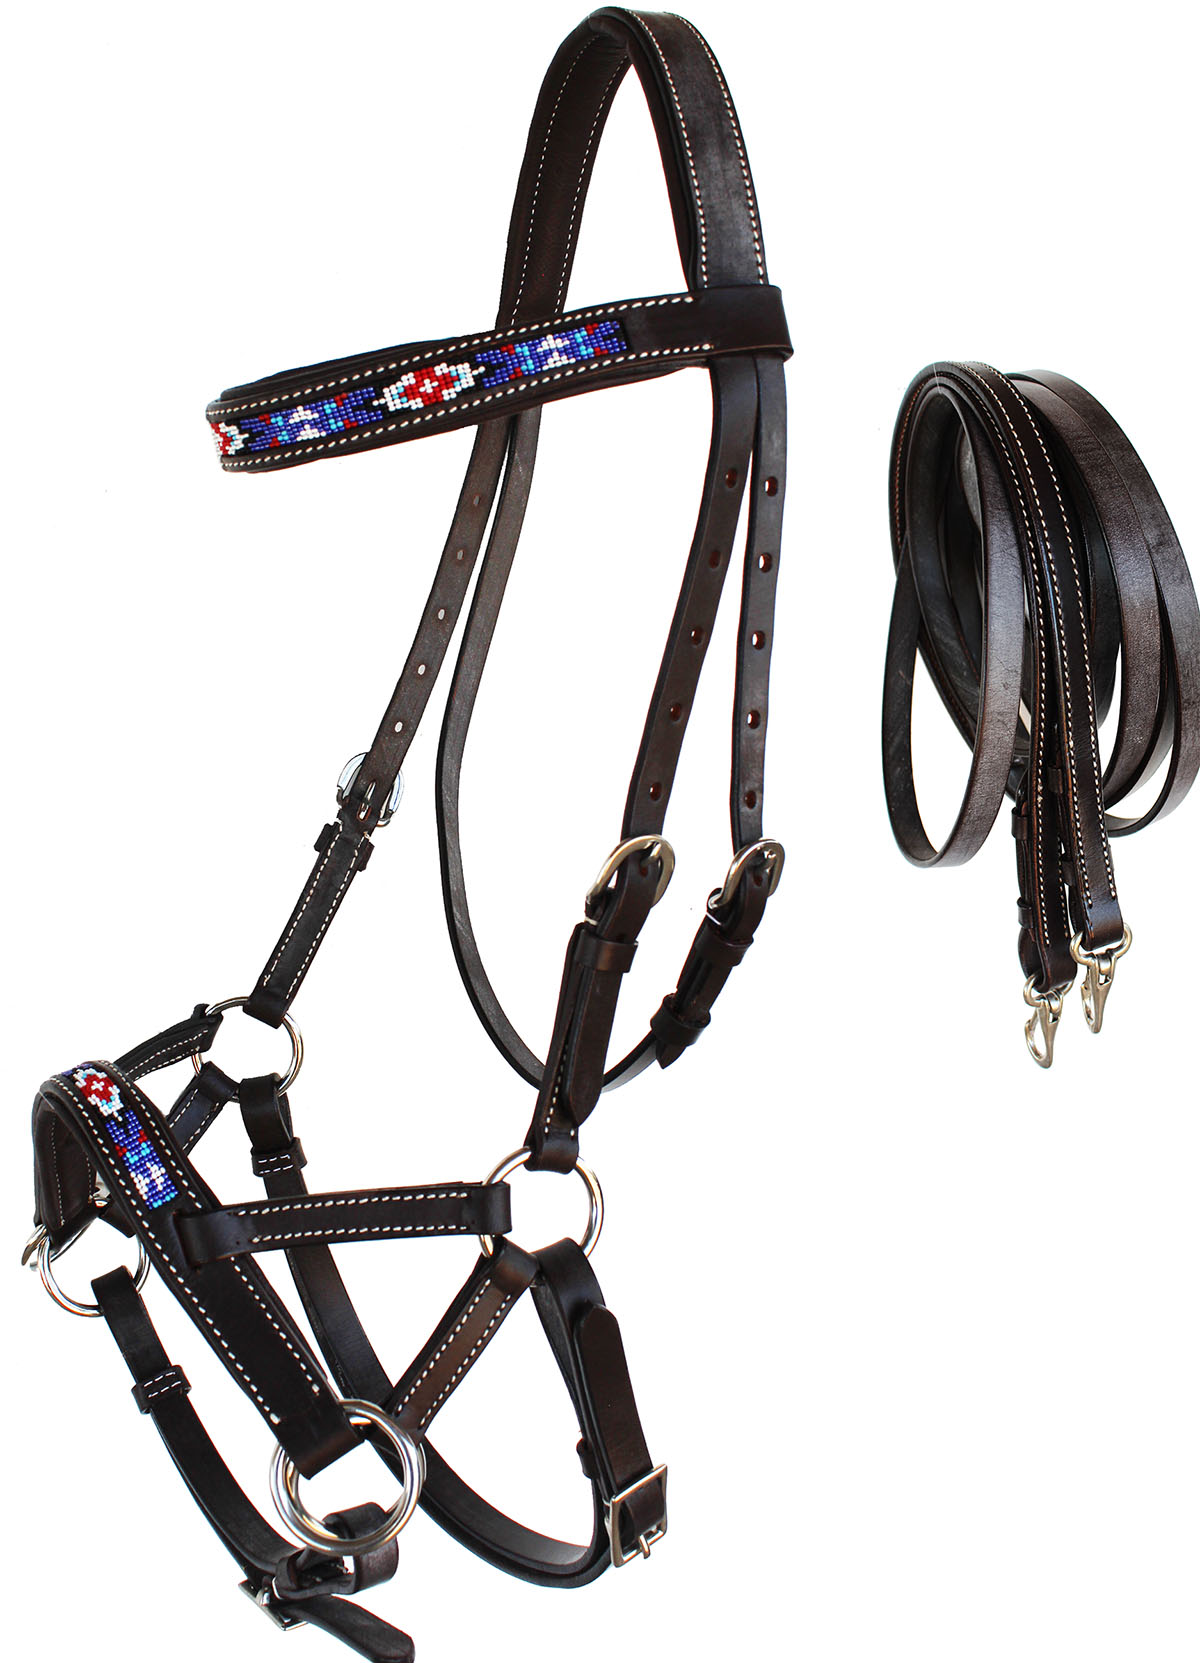 Horse Western Leather Bitless Sidepull 77RT2 Reins Beaded New products, world's highest quality popular! Max 54% OFF Bridle